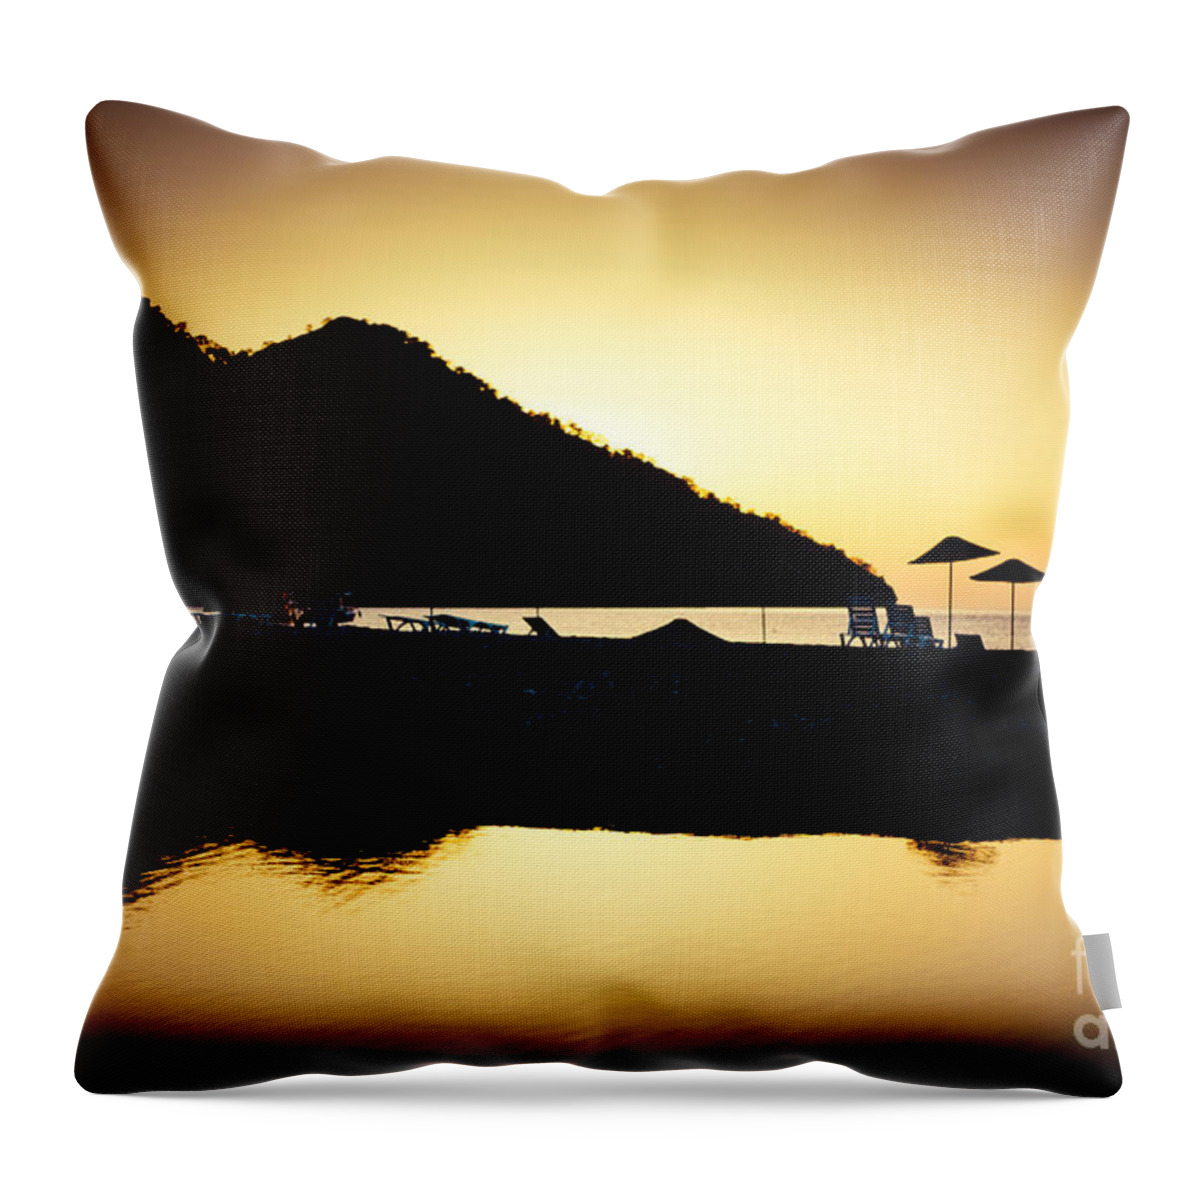 Water Throw Pillow featuring the photograph Sunrise At Sea Coast Brown by Raimond Klavins